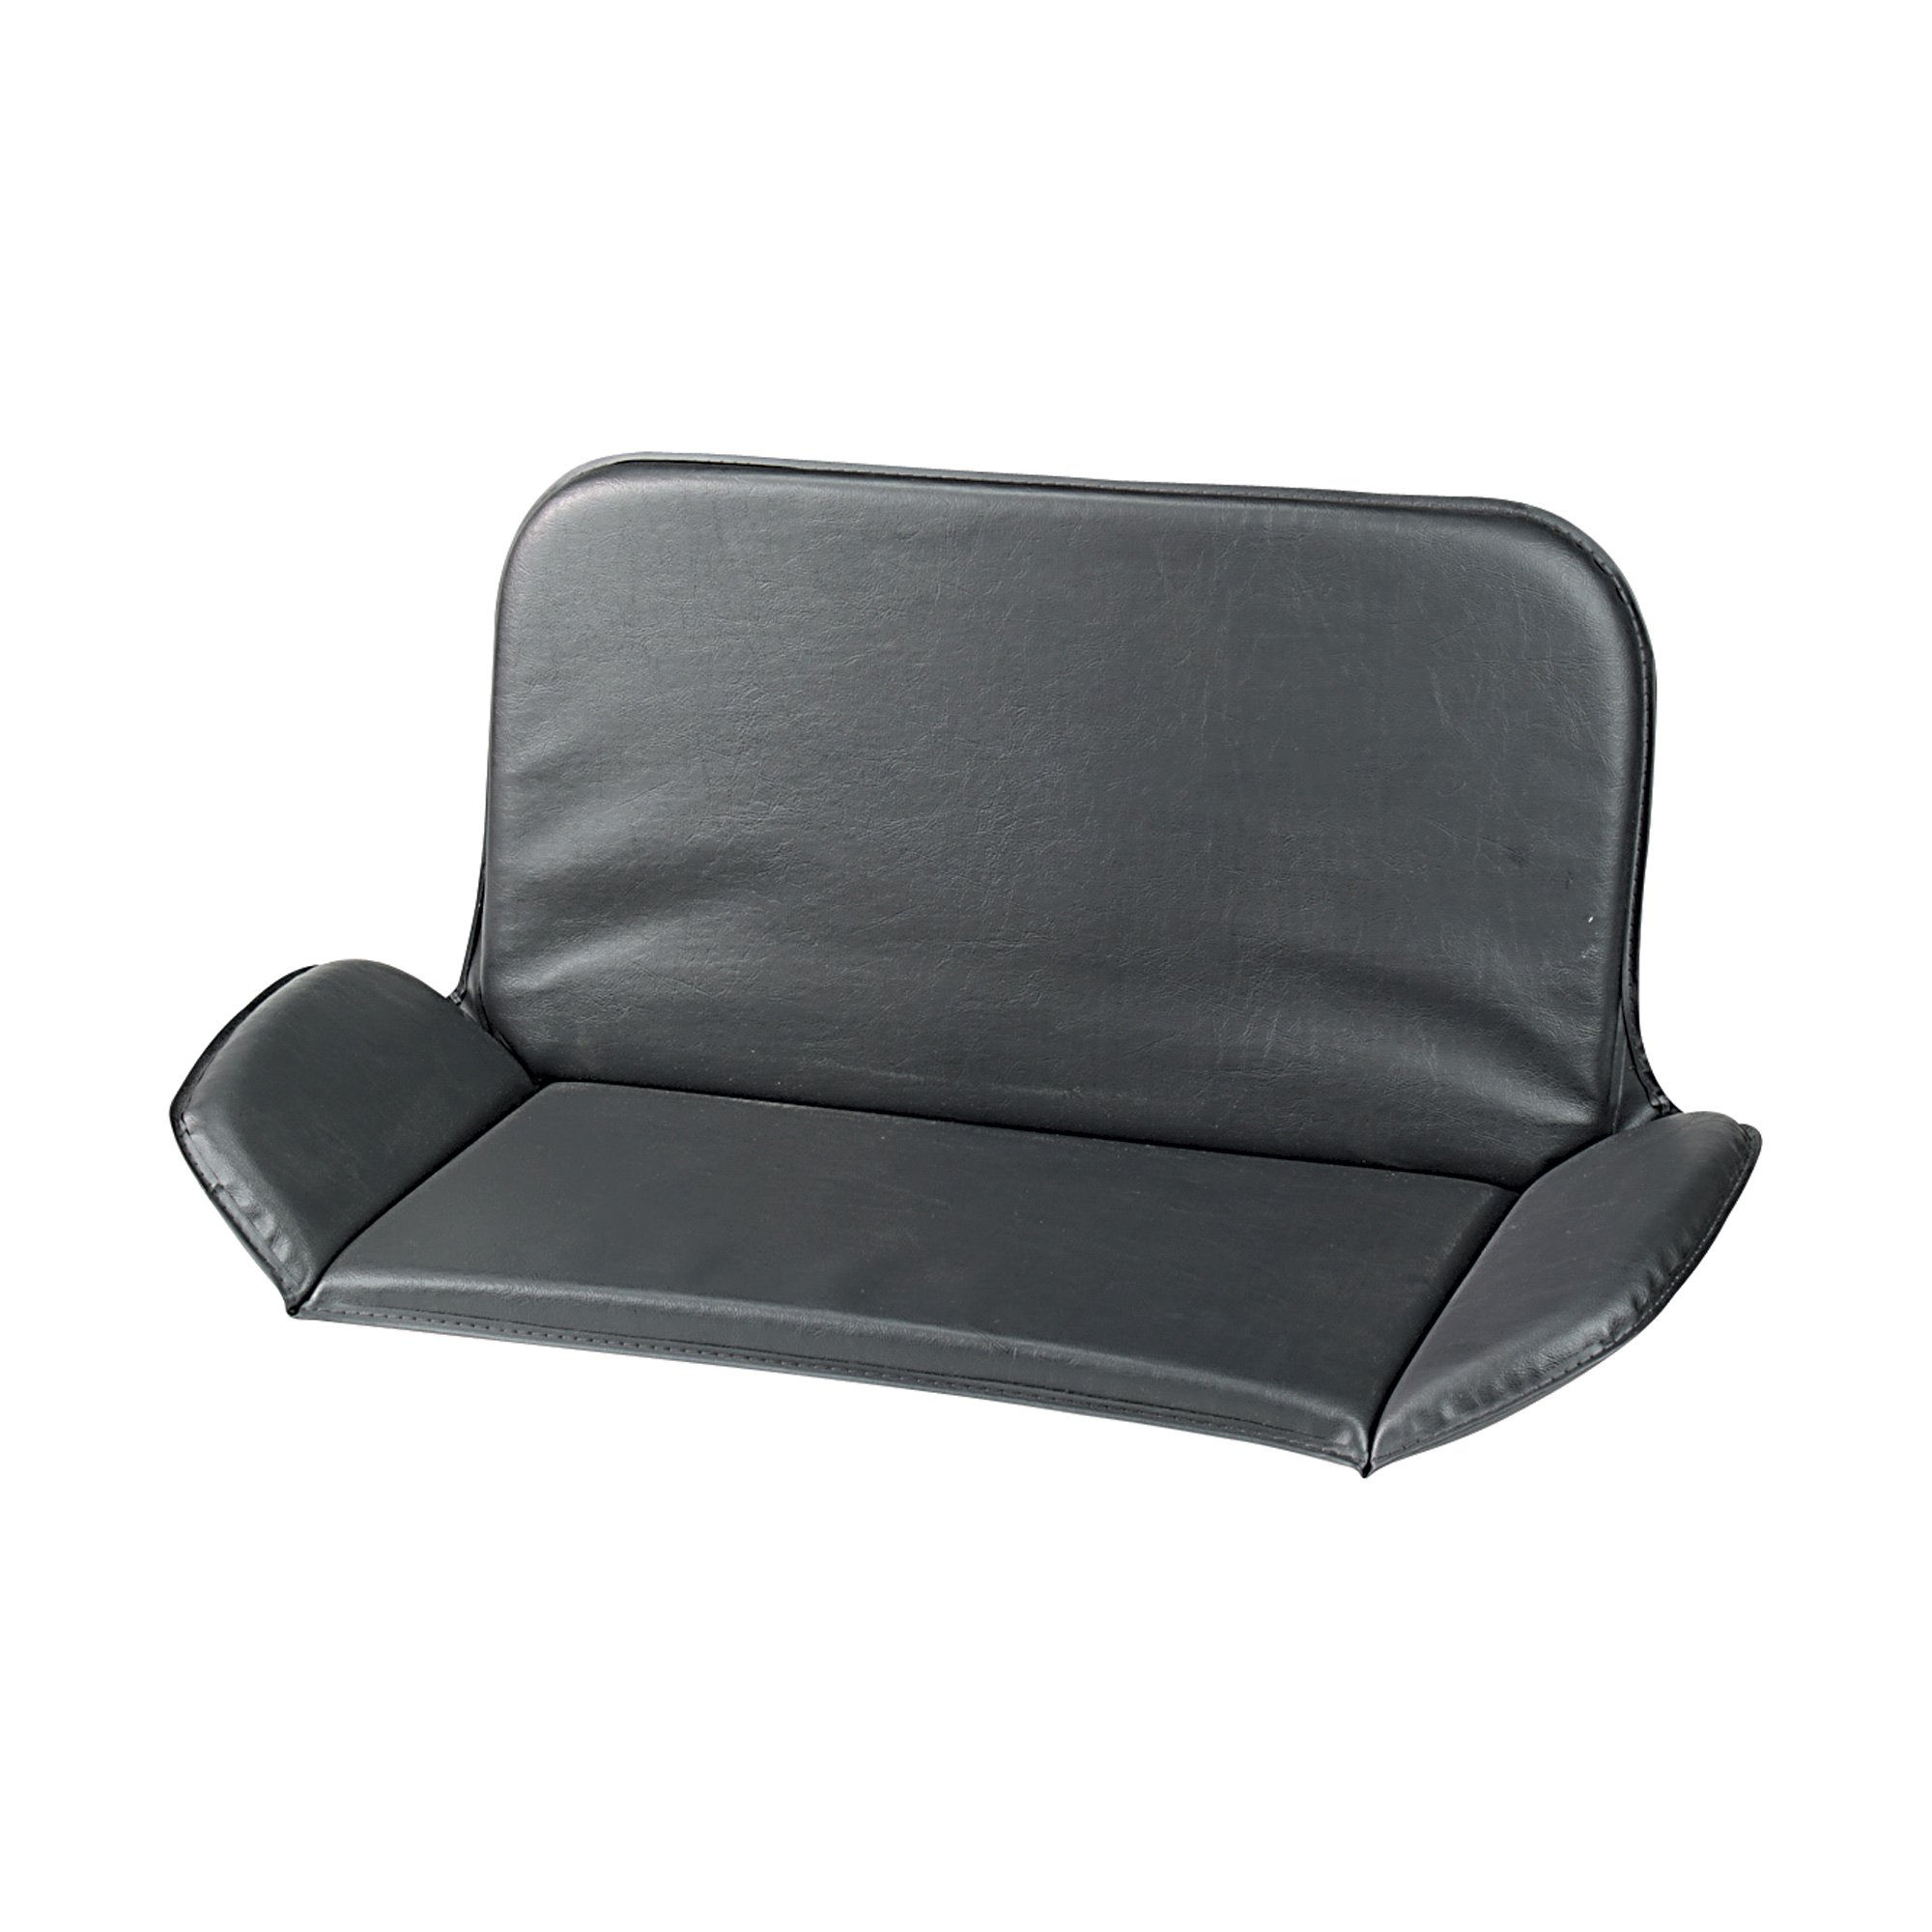 Double Seat Cushion for Go-Karts